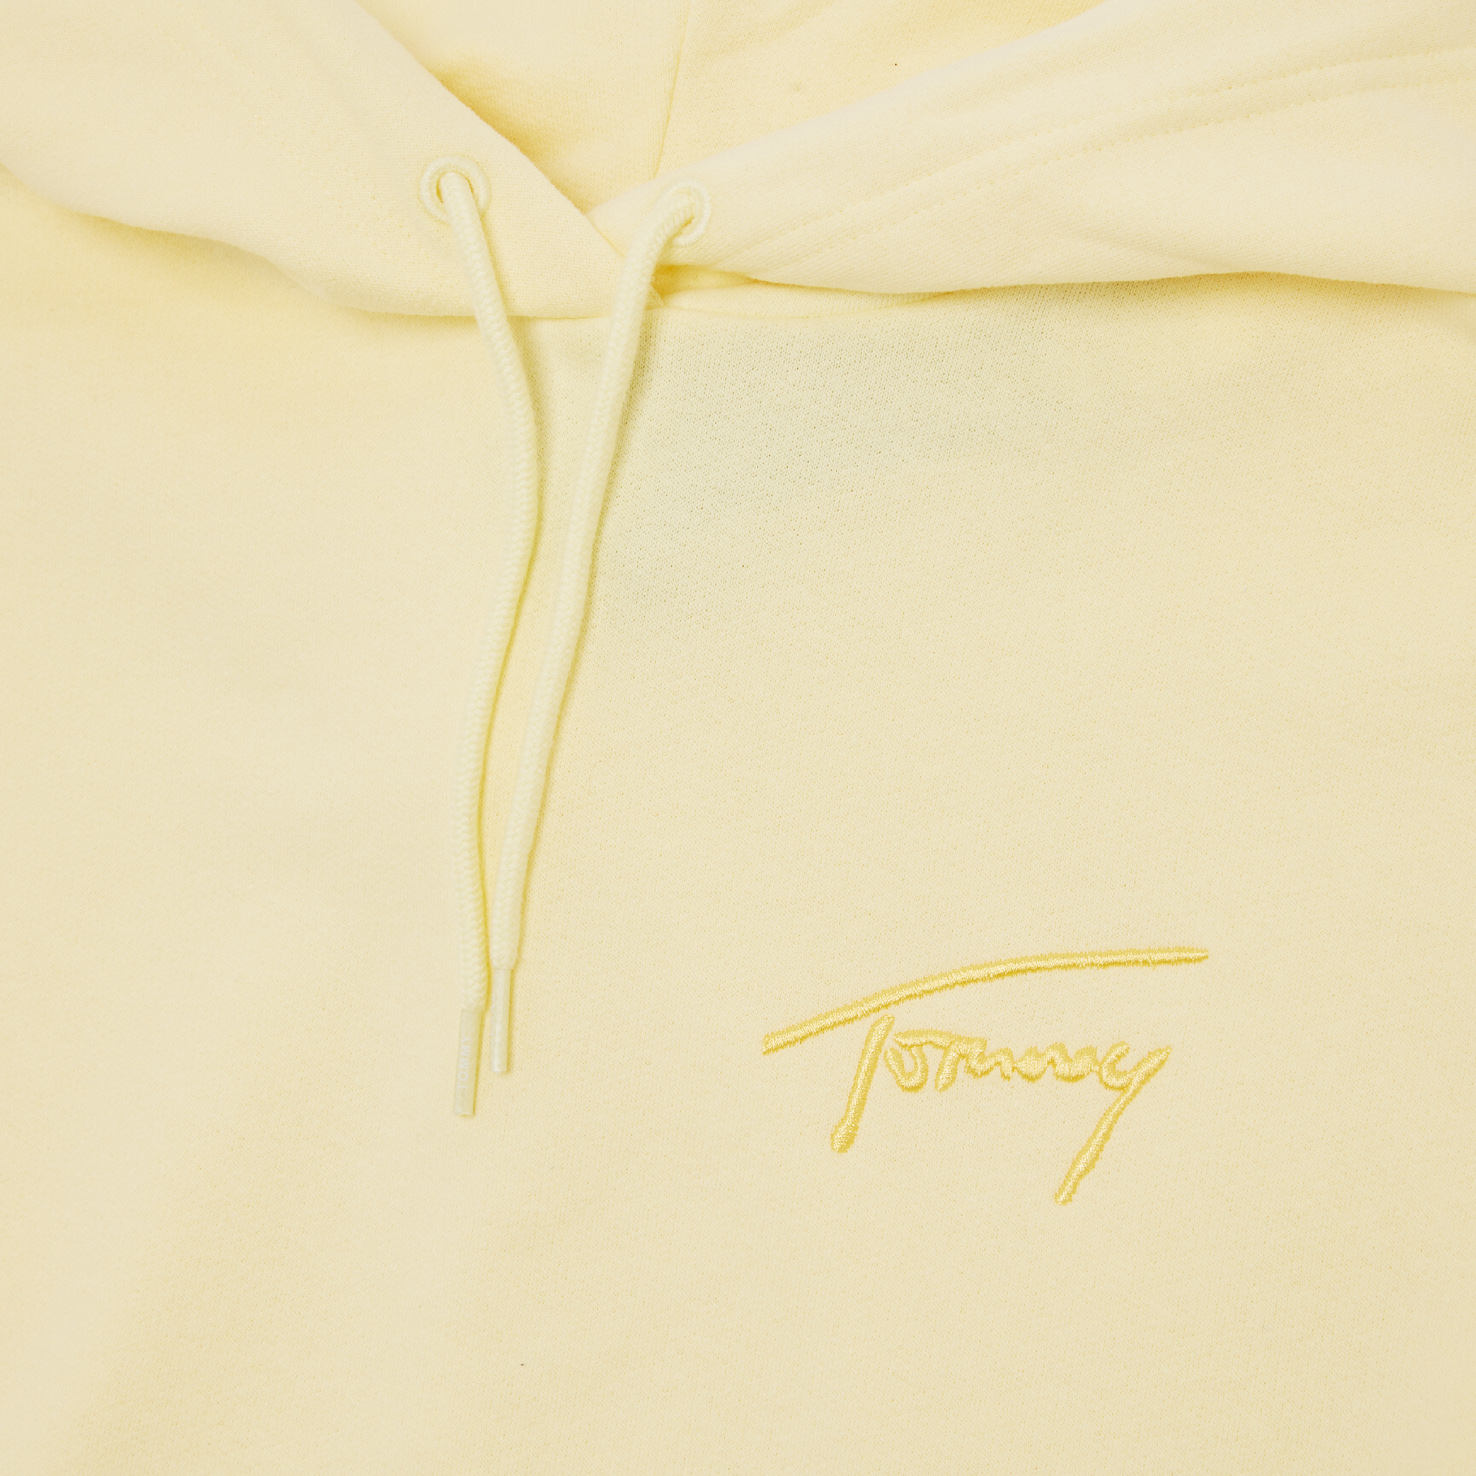 OVERSIZED TOMMY SIGNATURE HOODIE TOMMY JEANS, размер XS, цвет желтый TMDW0DW11815 - фото 3